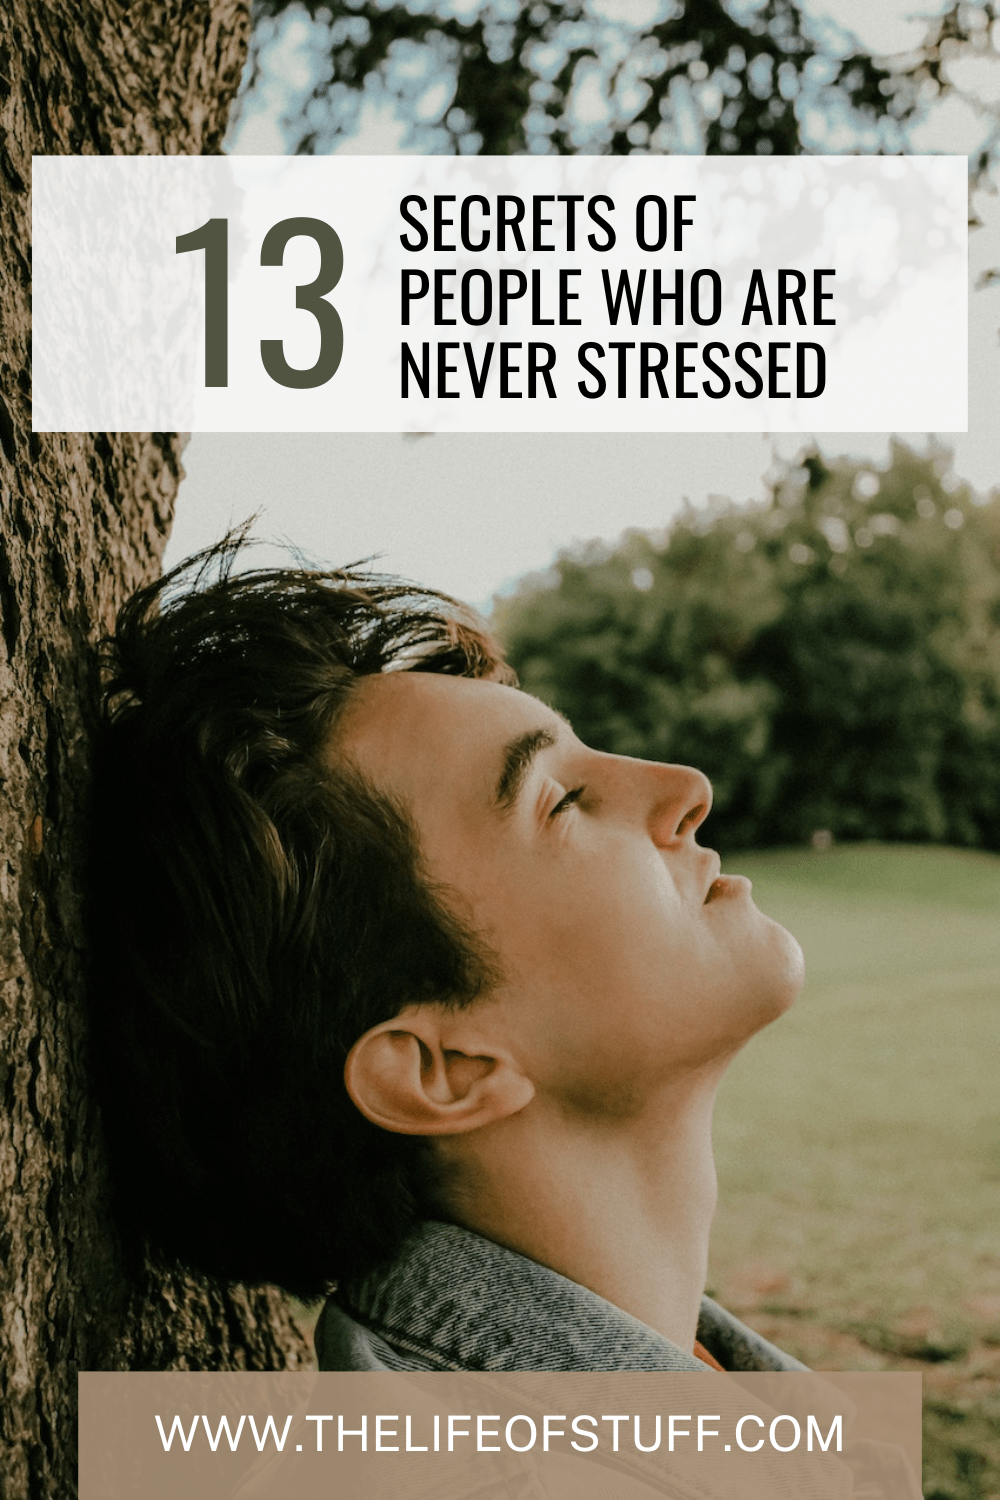 Secrets of People Who Are Never Stressed - The Life of Stuff